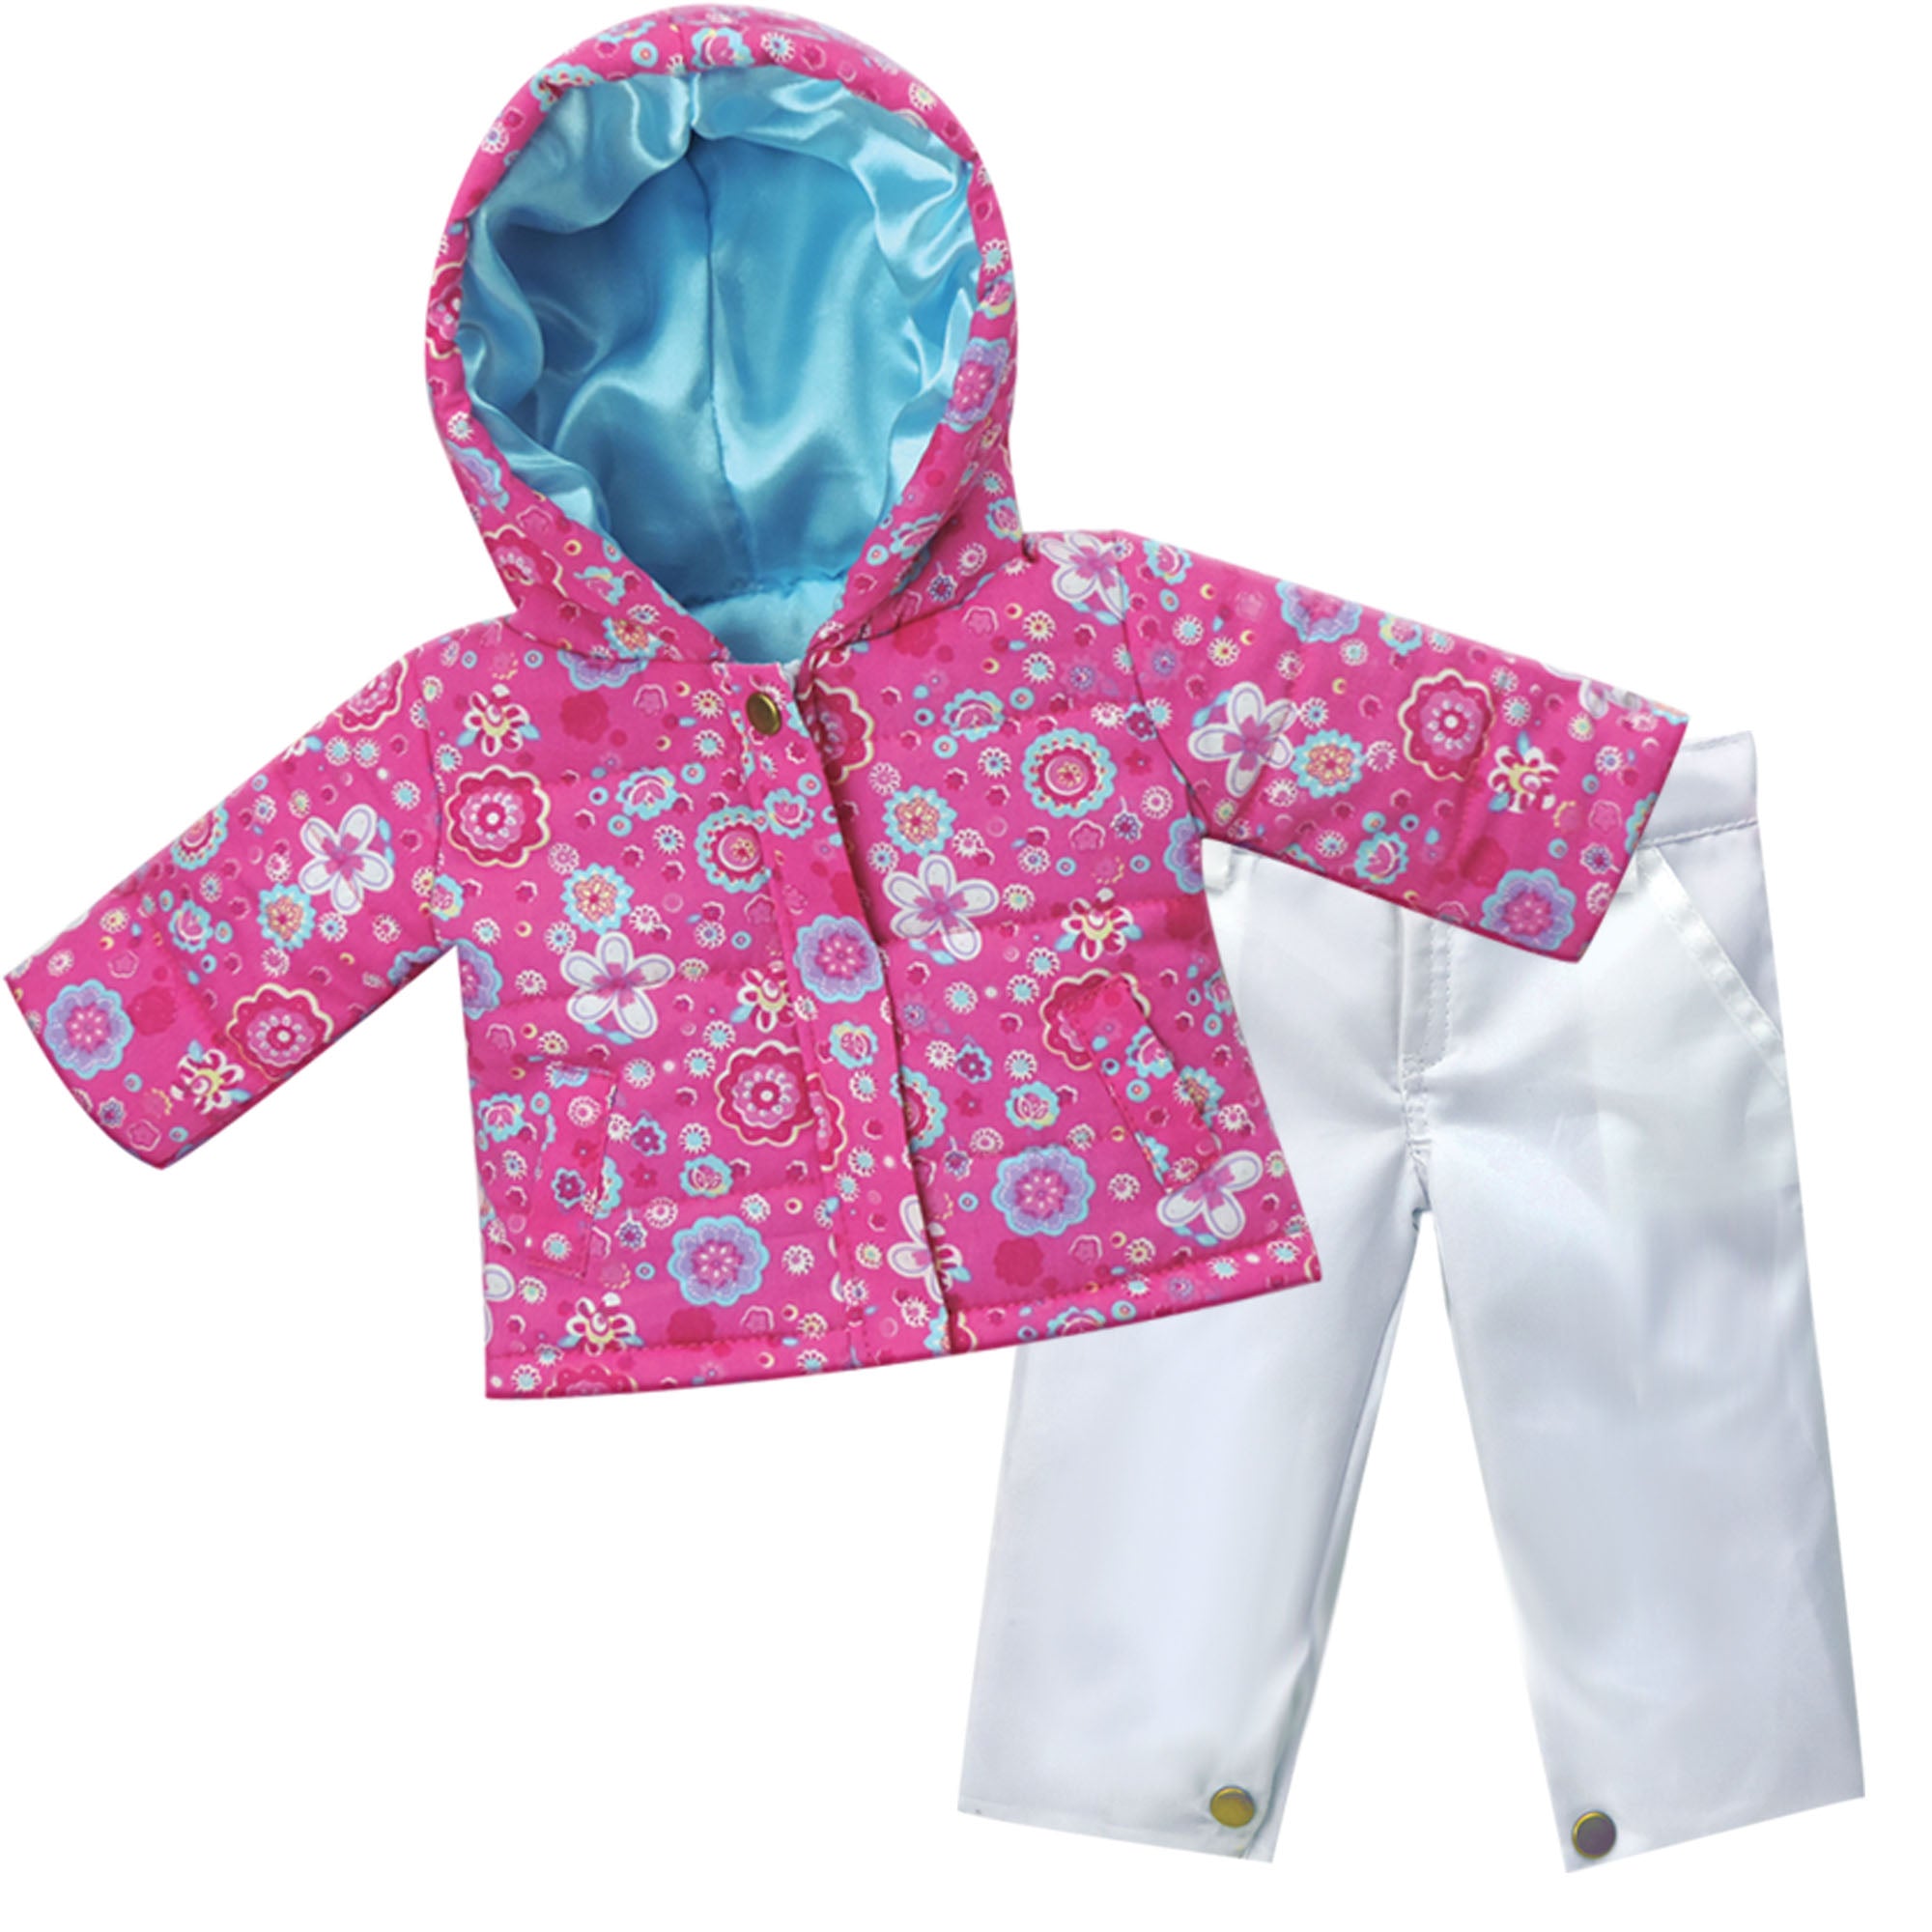 Sophia’s Two-Piece Bright & Colorful Flower Print Winter Parka & White Snowboard Pants Complete Clothing Outfit Set for 18” Dolls, Hot Pink